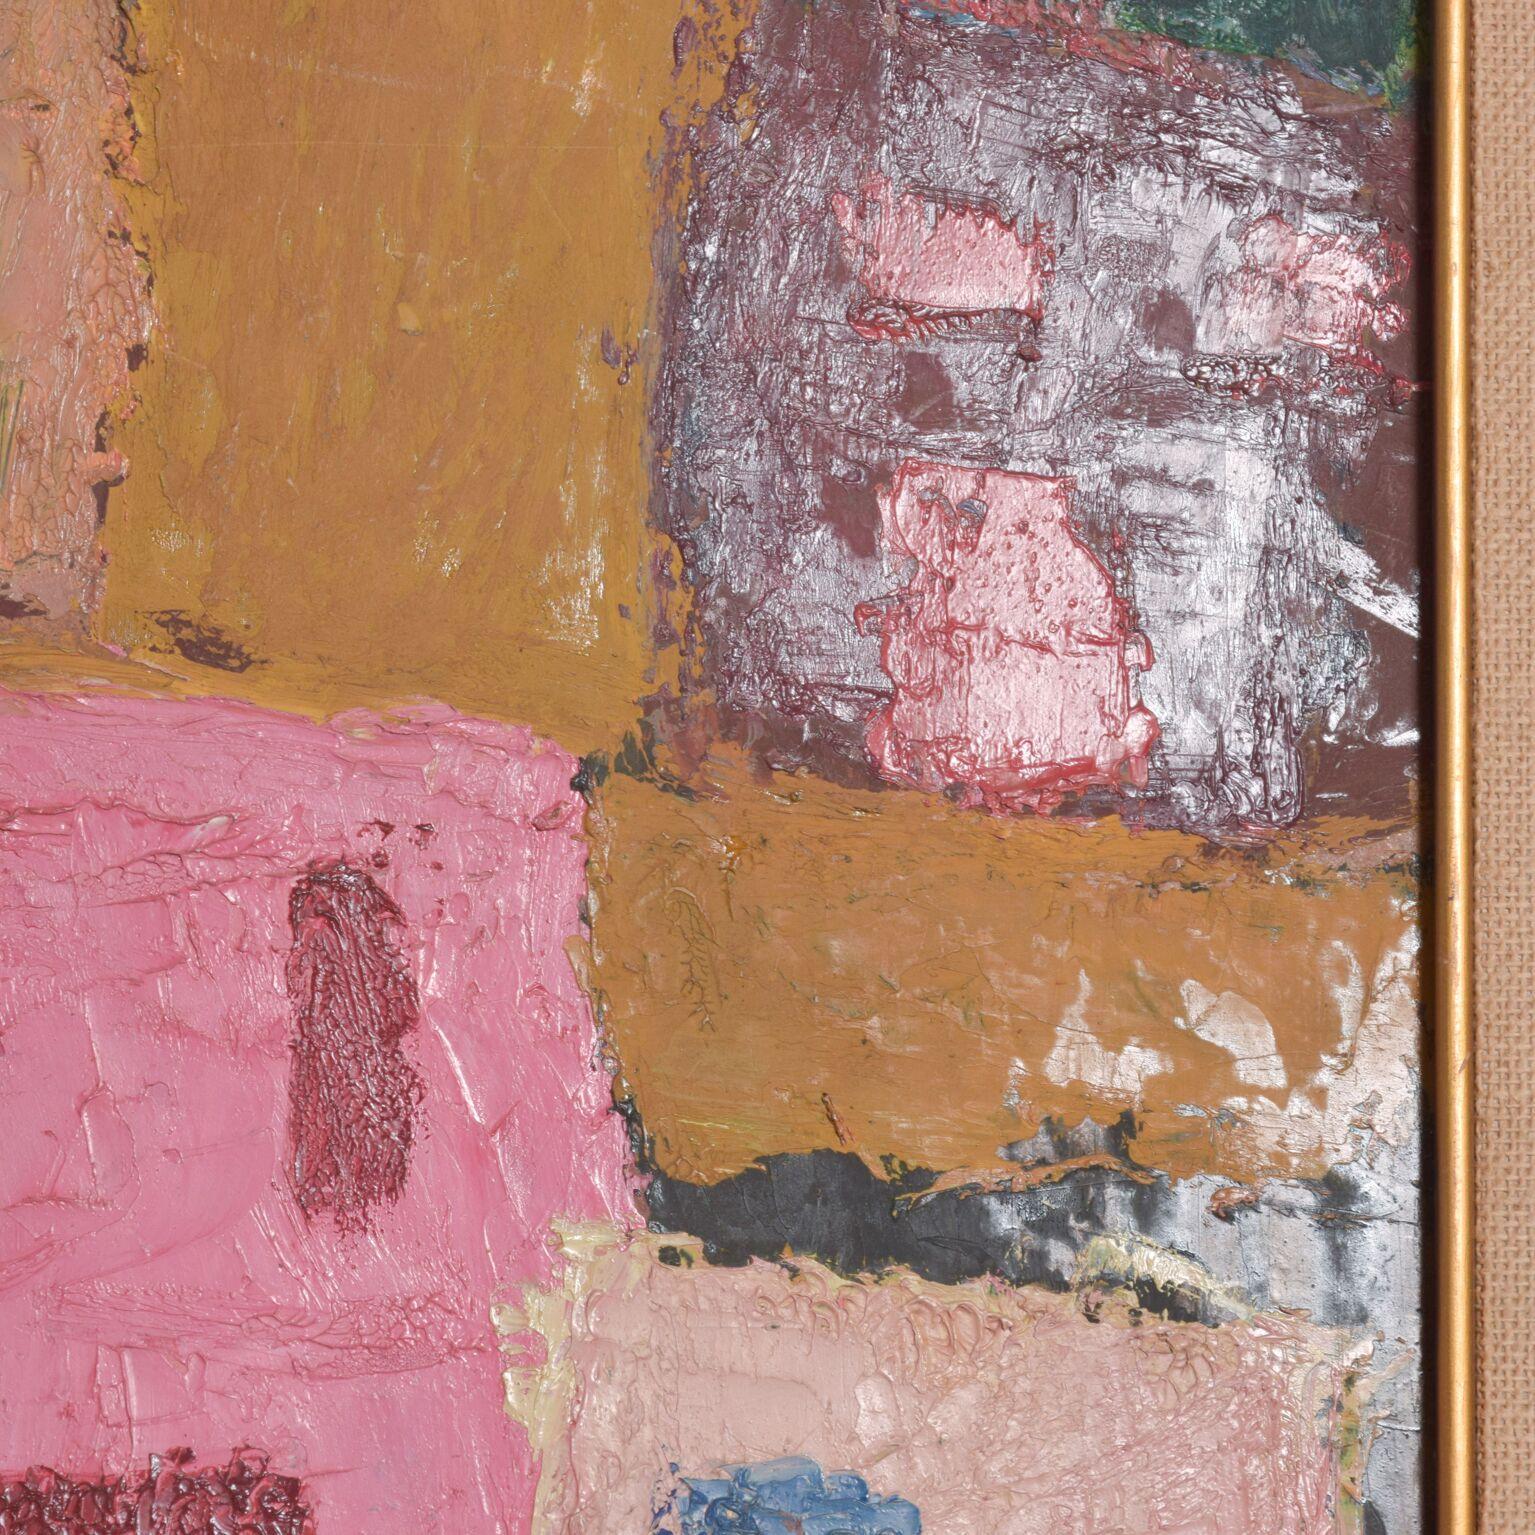 Expressionist 1980s Mexico Modernism in Pink Abstract Art Oil on Canvas Pedro Coronel Style